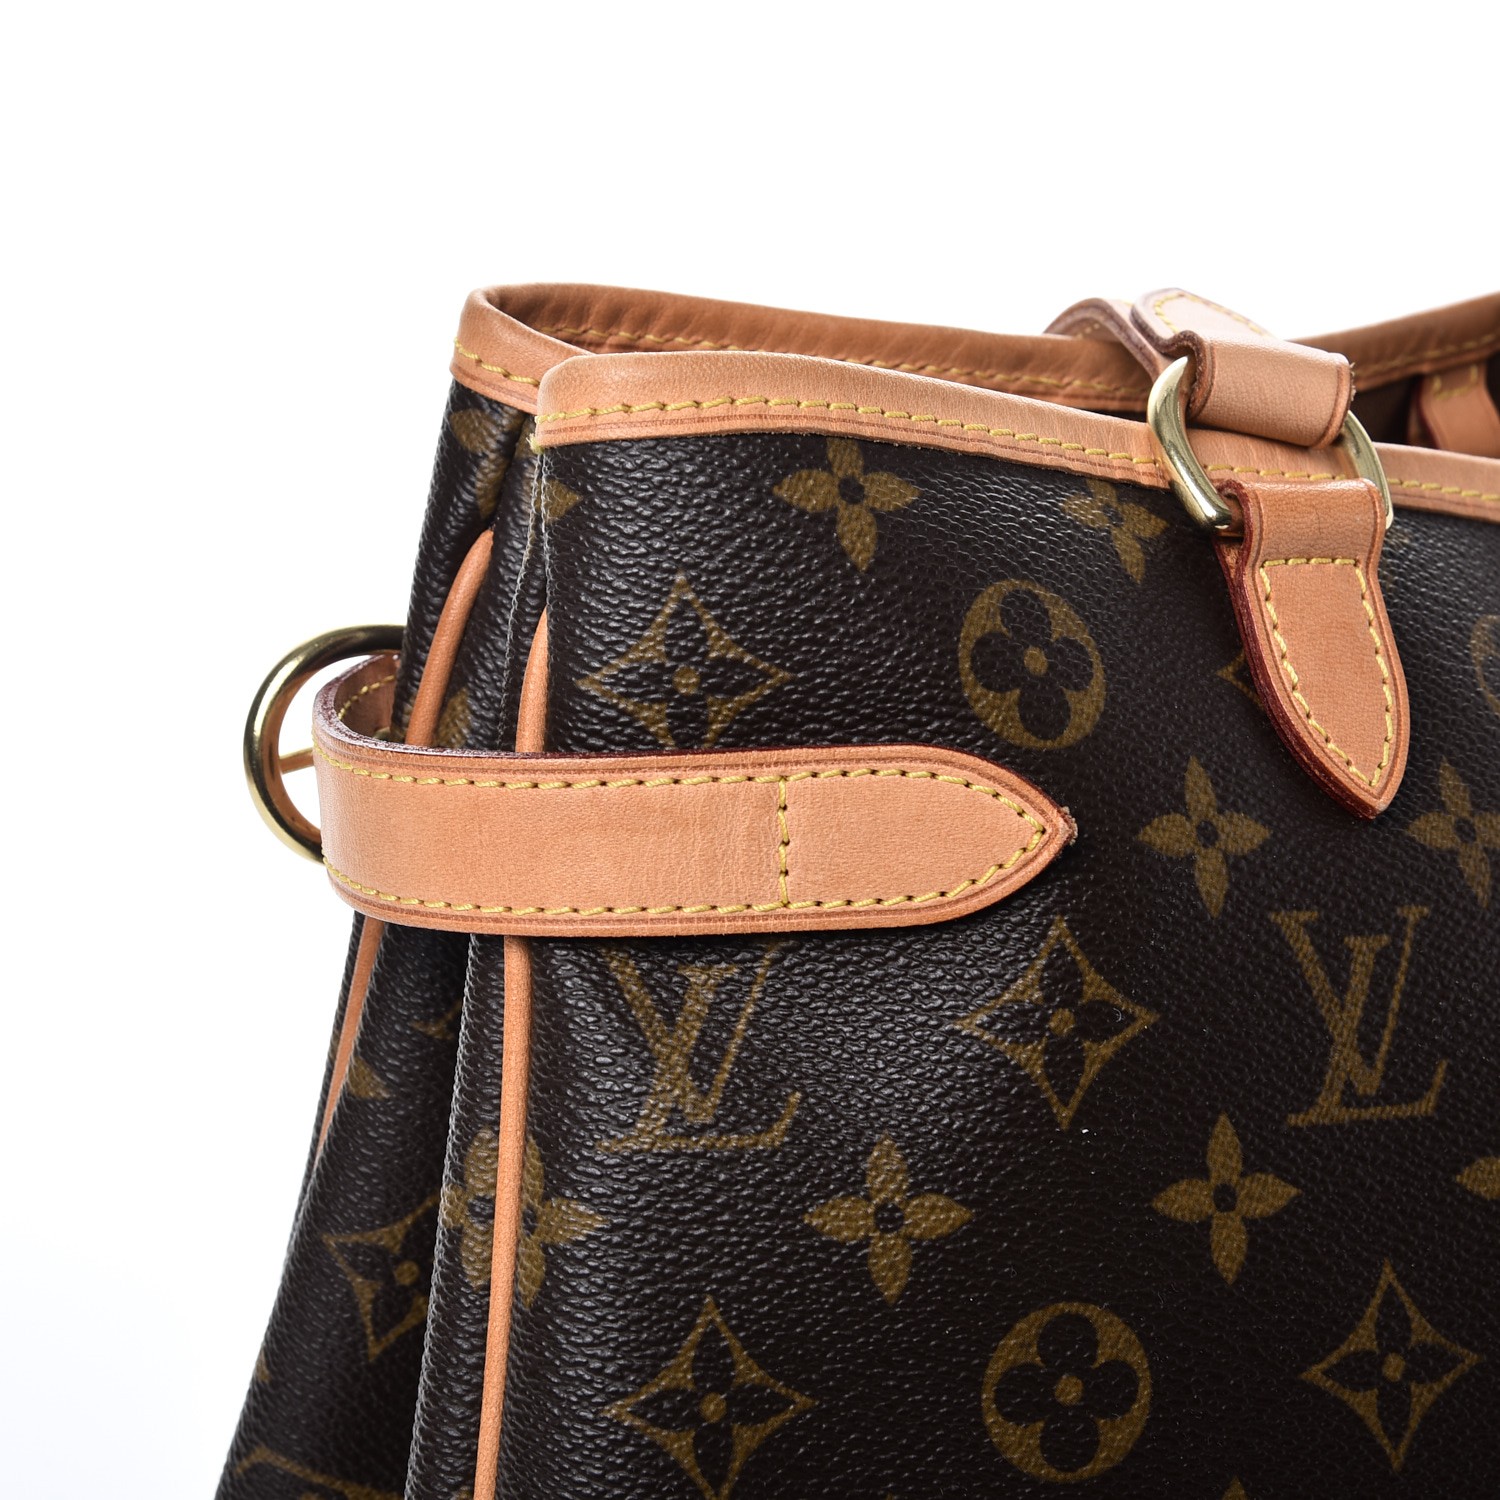 Over $100K In Fake Louis Vuitton Bags Seized In Route To NJ